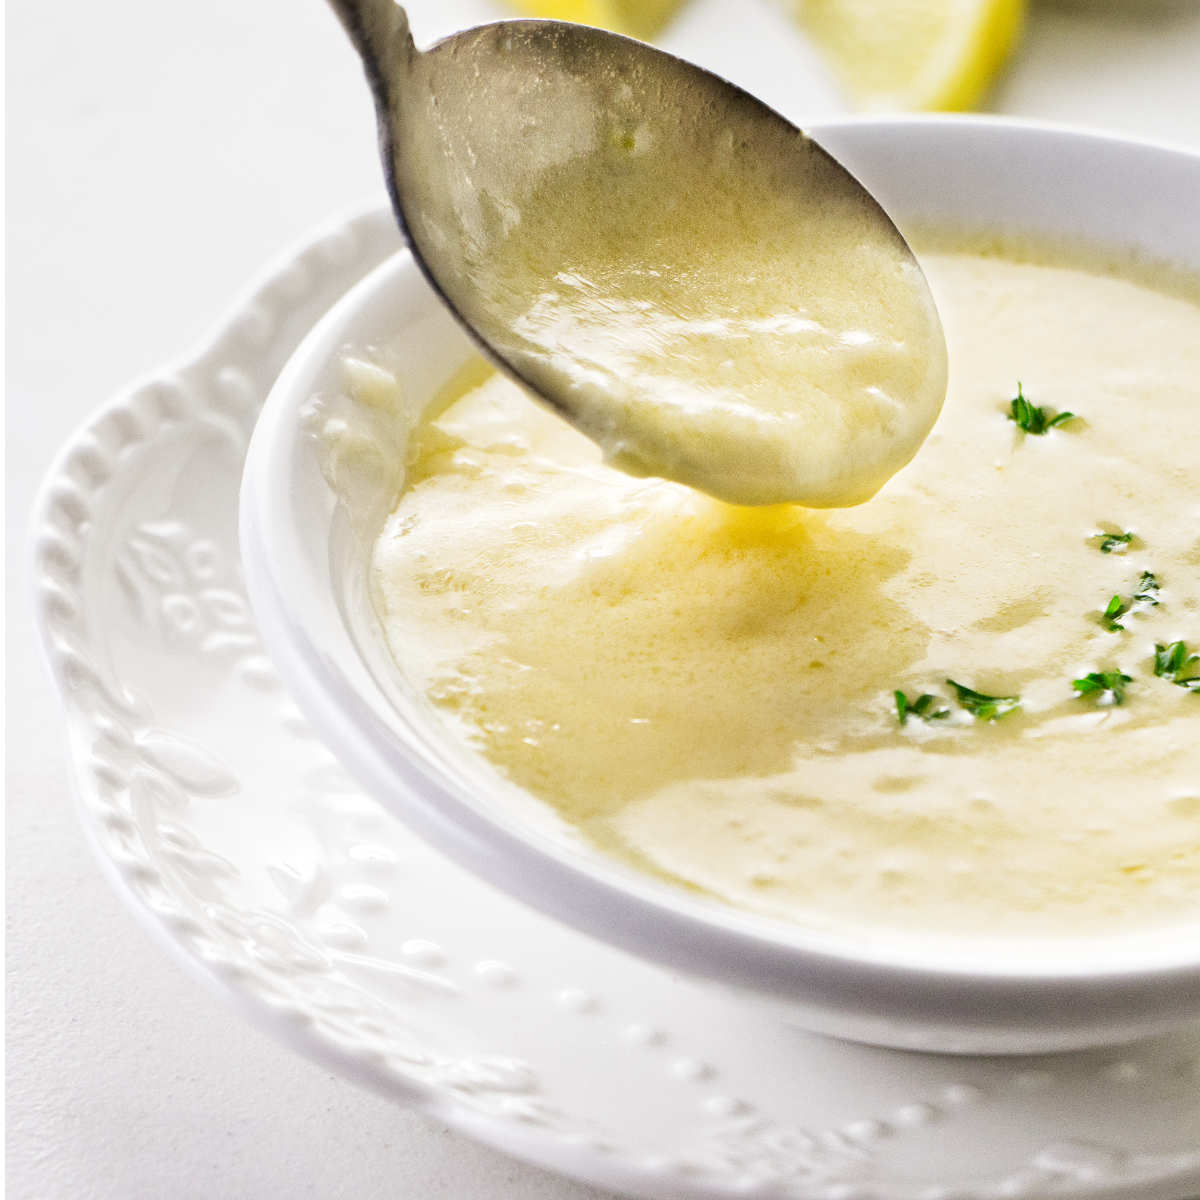 A spoon dipping into a dish of lemon garlic butter sauce.